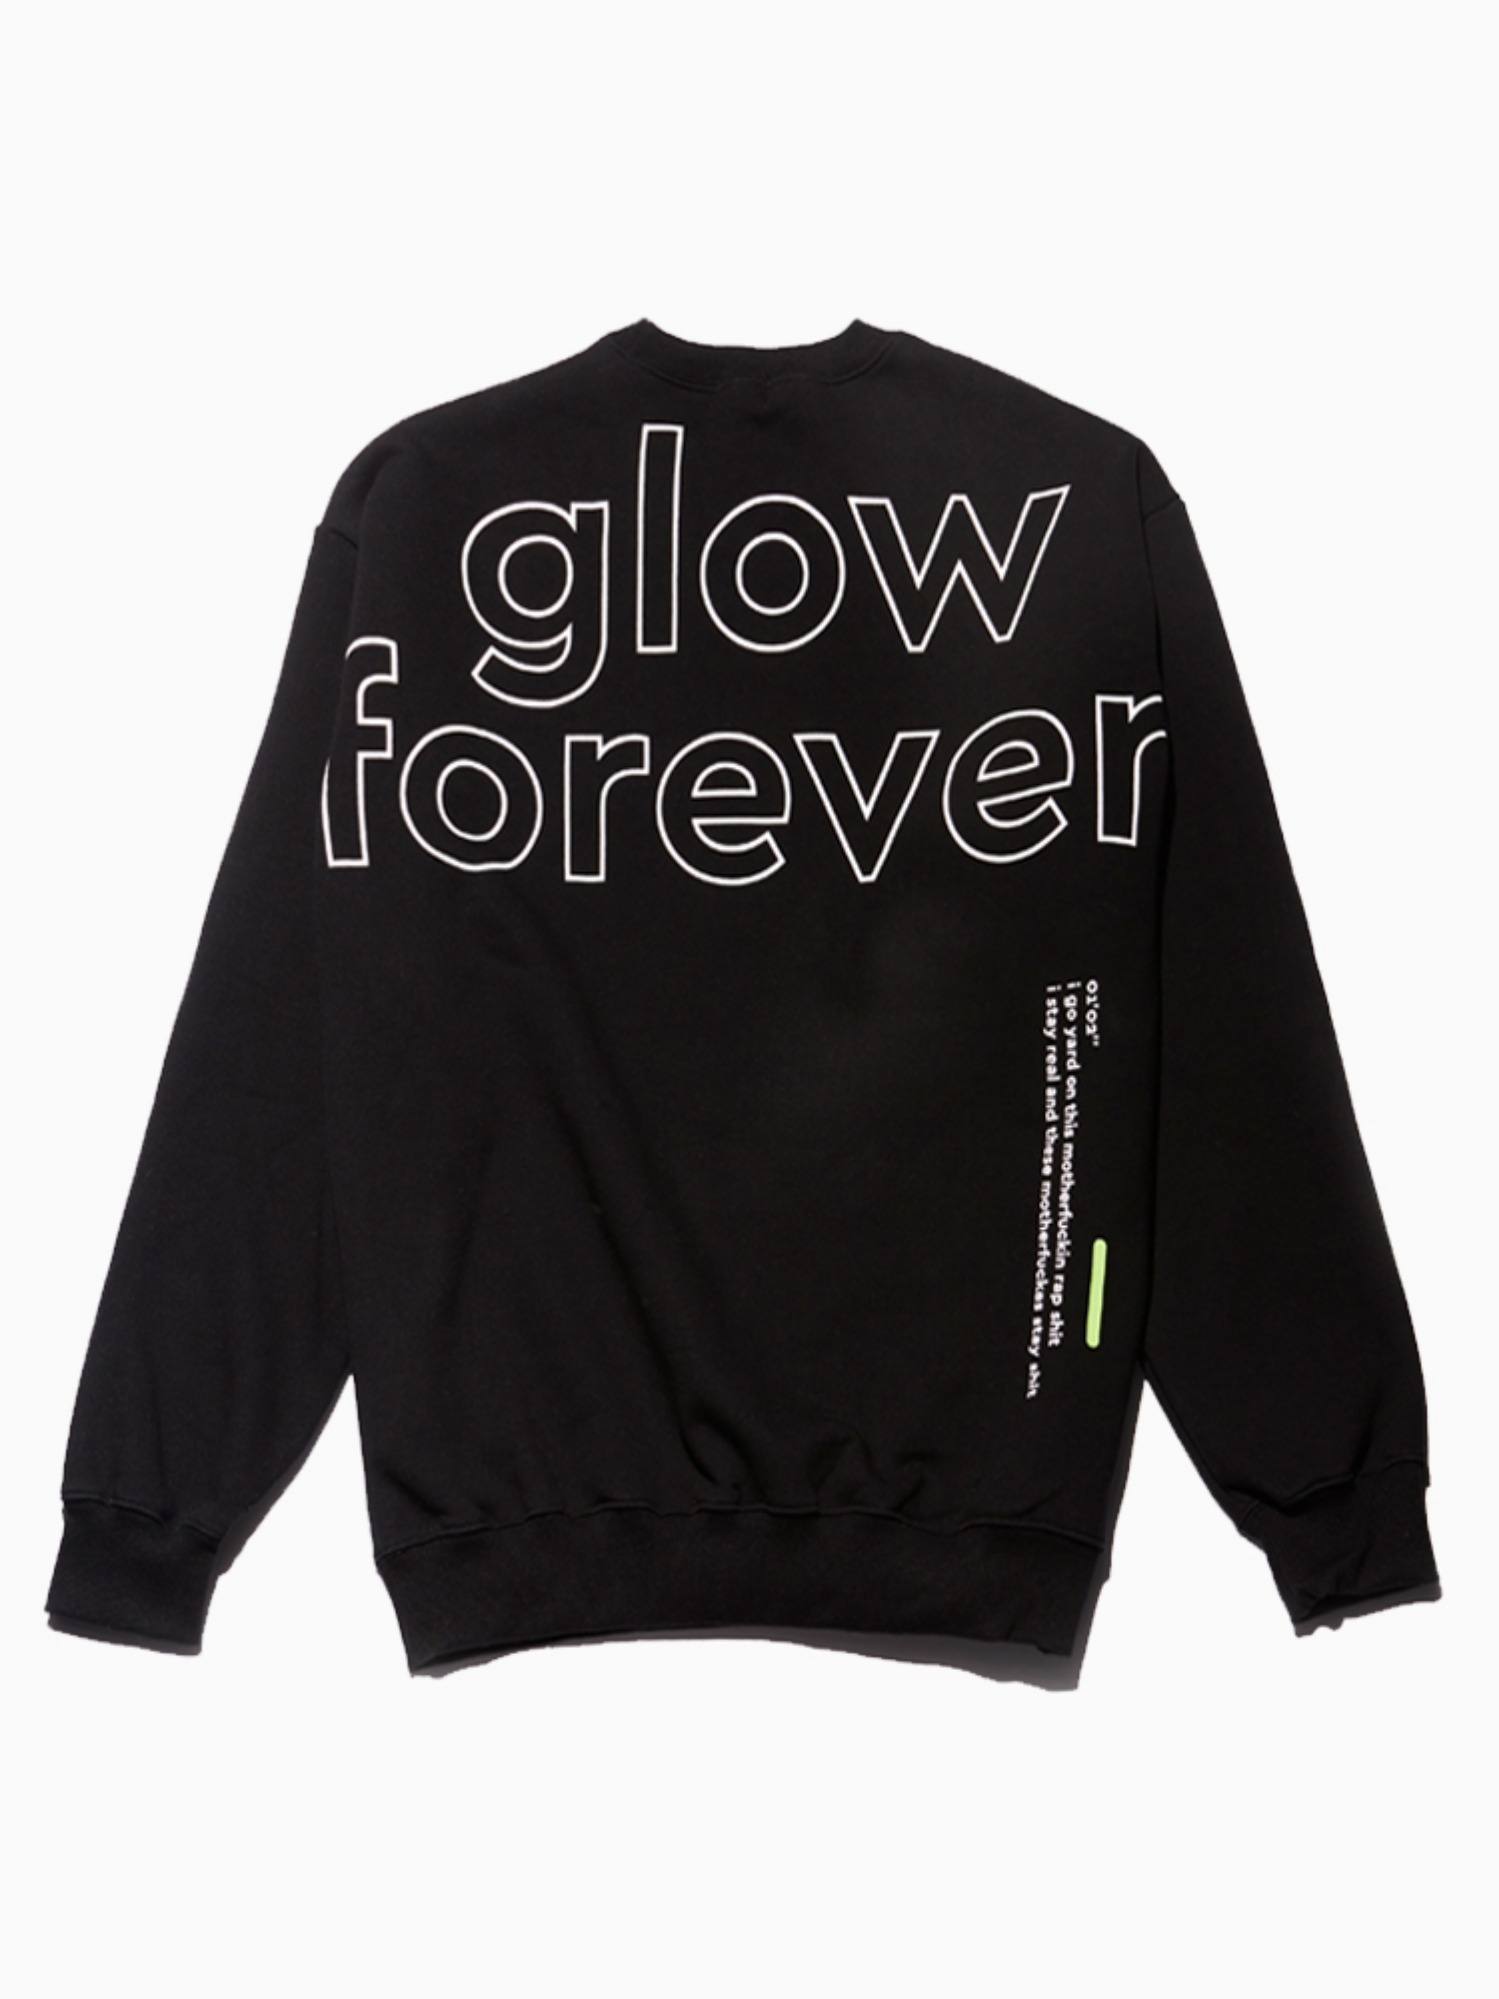 The Quiett [glow forever] - Crew neck Shirts Black (Limited)